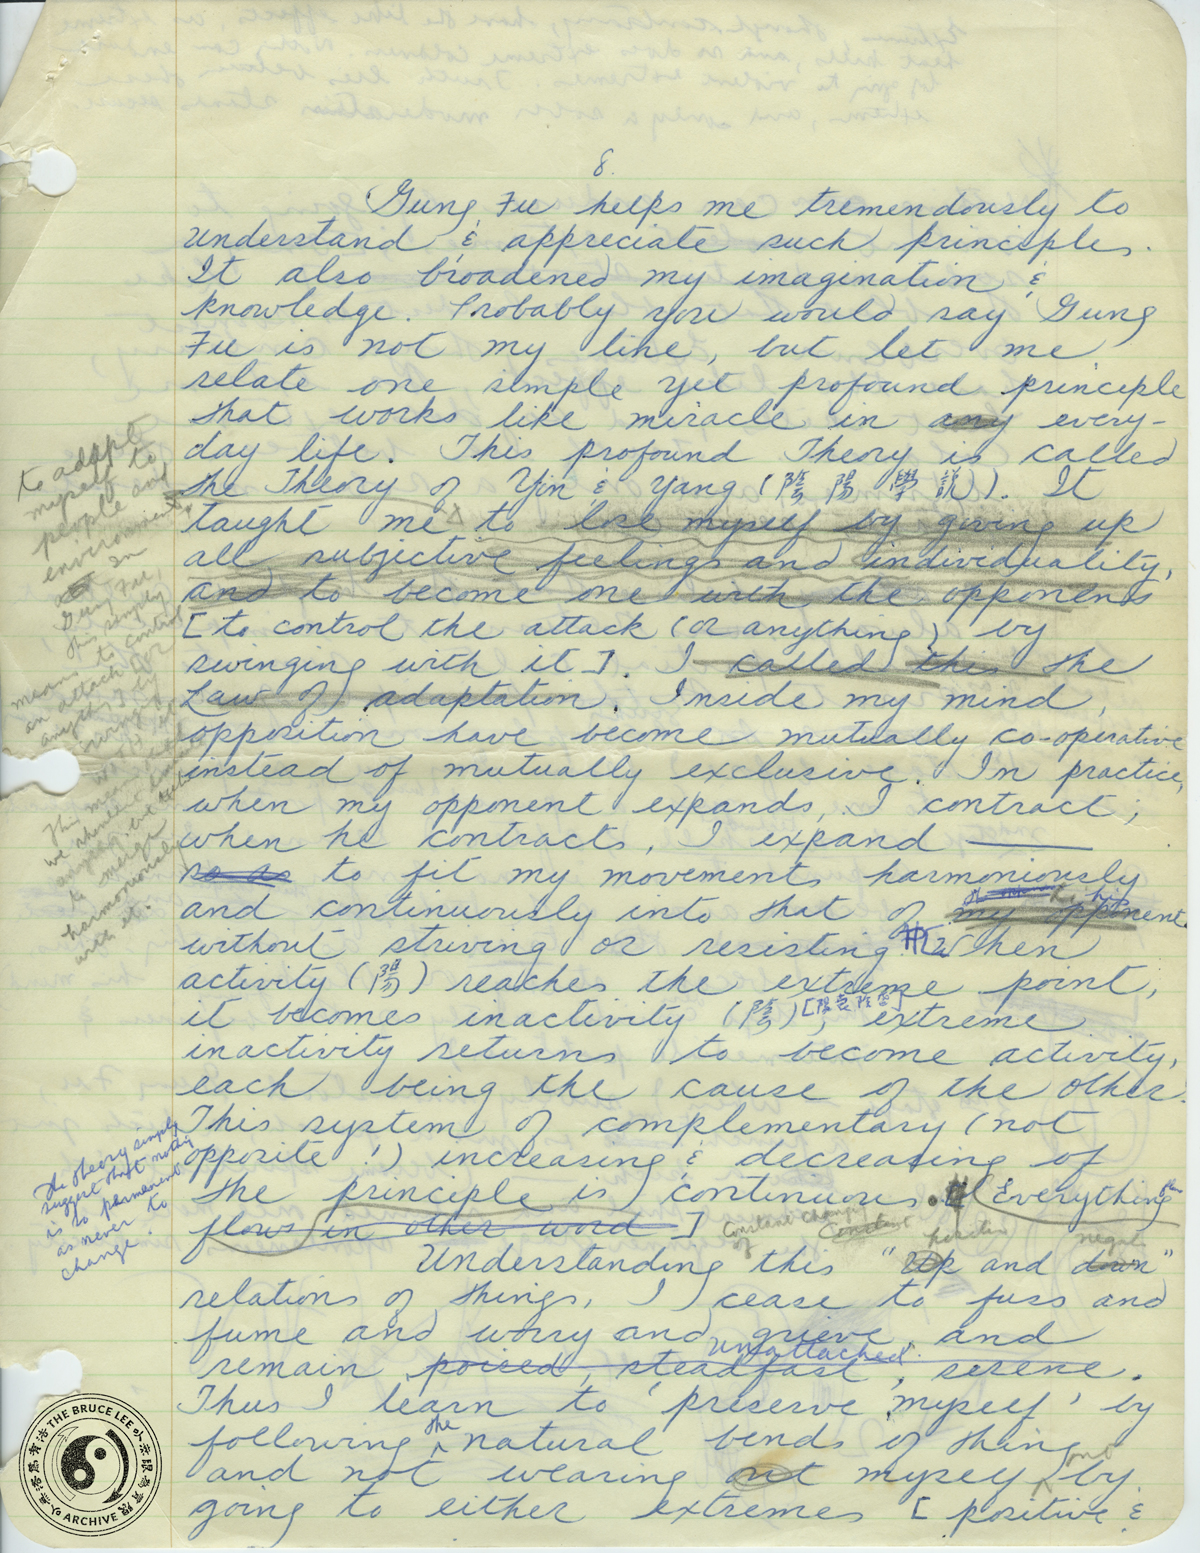 Letter-to-Pearl-draft-pg.8-archive.jpg